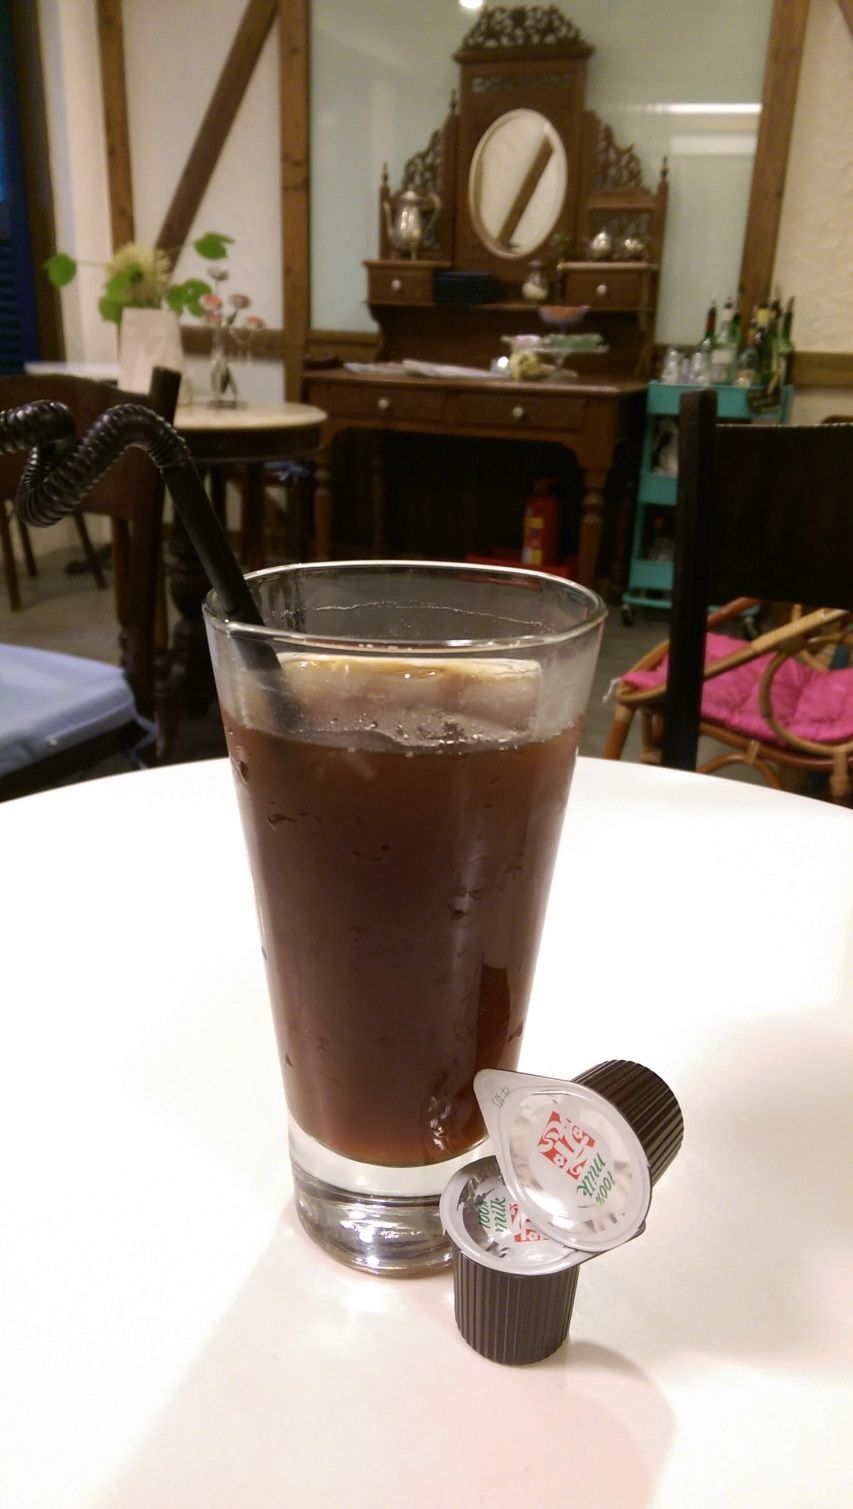 Brown, Drink, Liquid, Chair, Non-alcoholic beverage, Drinkware, Picture frame, Coffee, Chocolate milk, Drinking straw, 